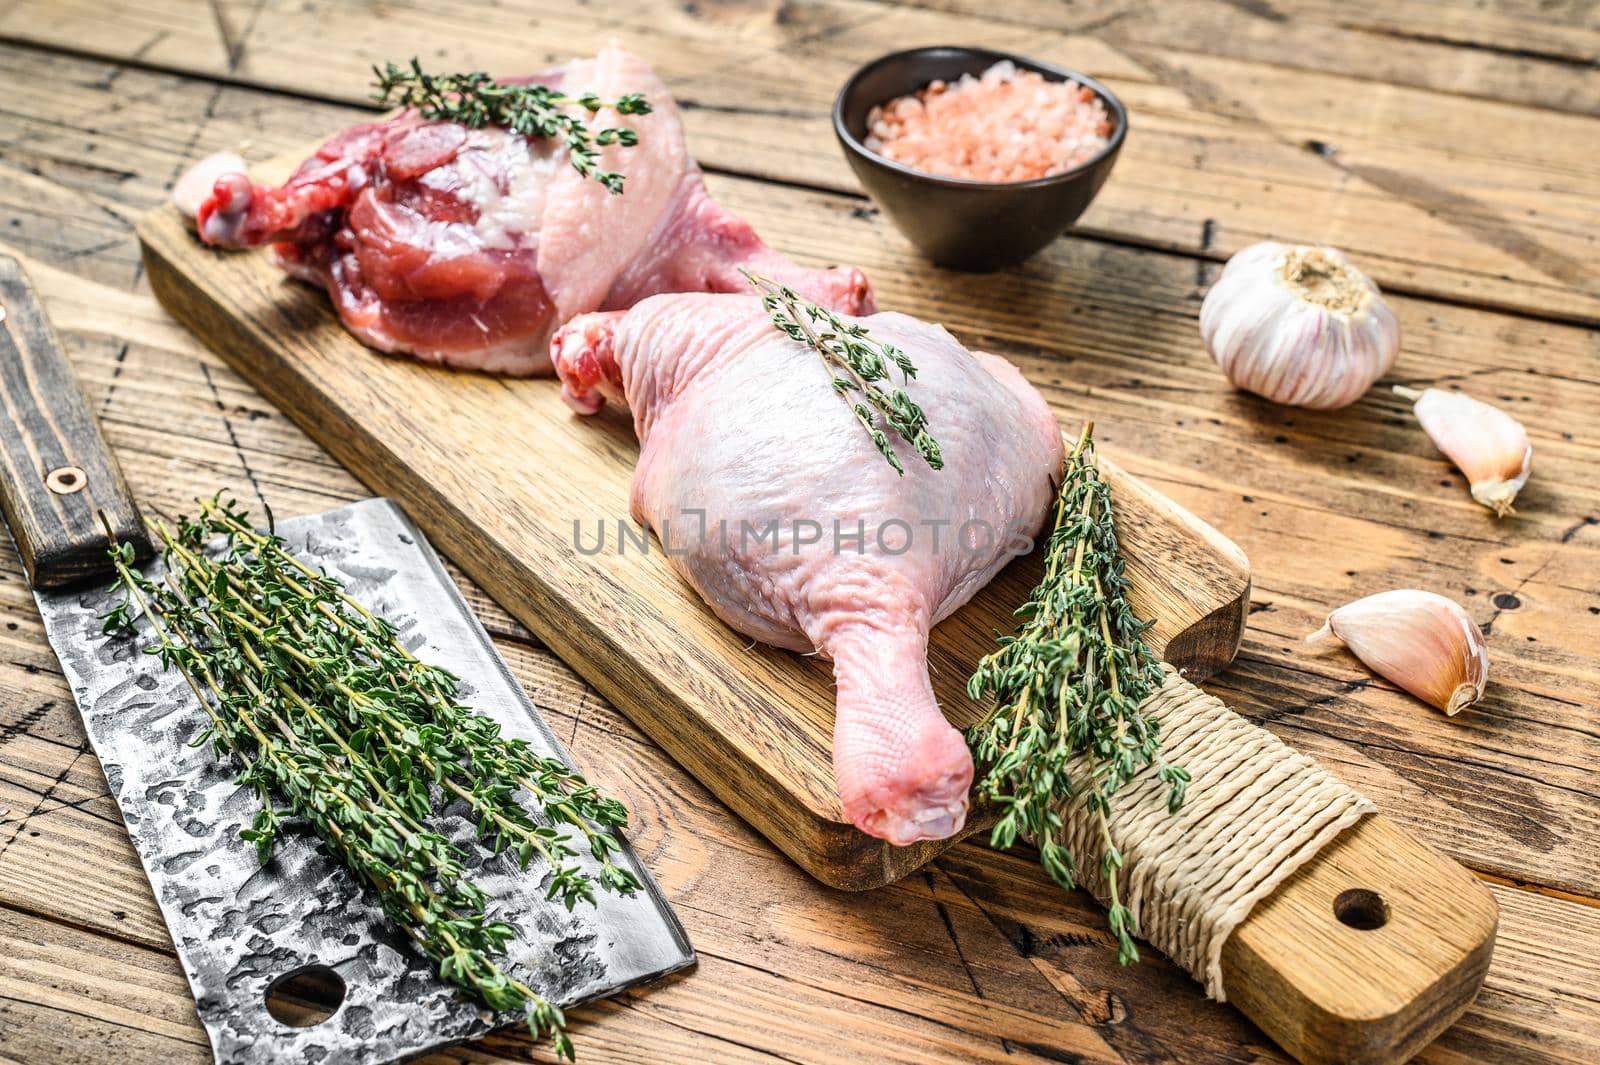 Duck legs on cutting board, Raw meat. Wooden background. Top view.